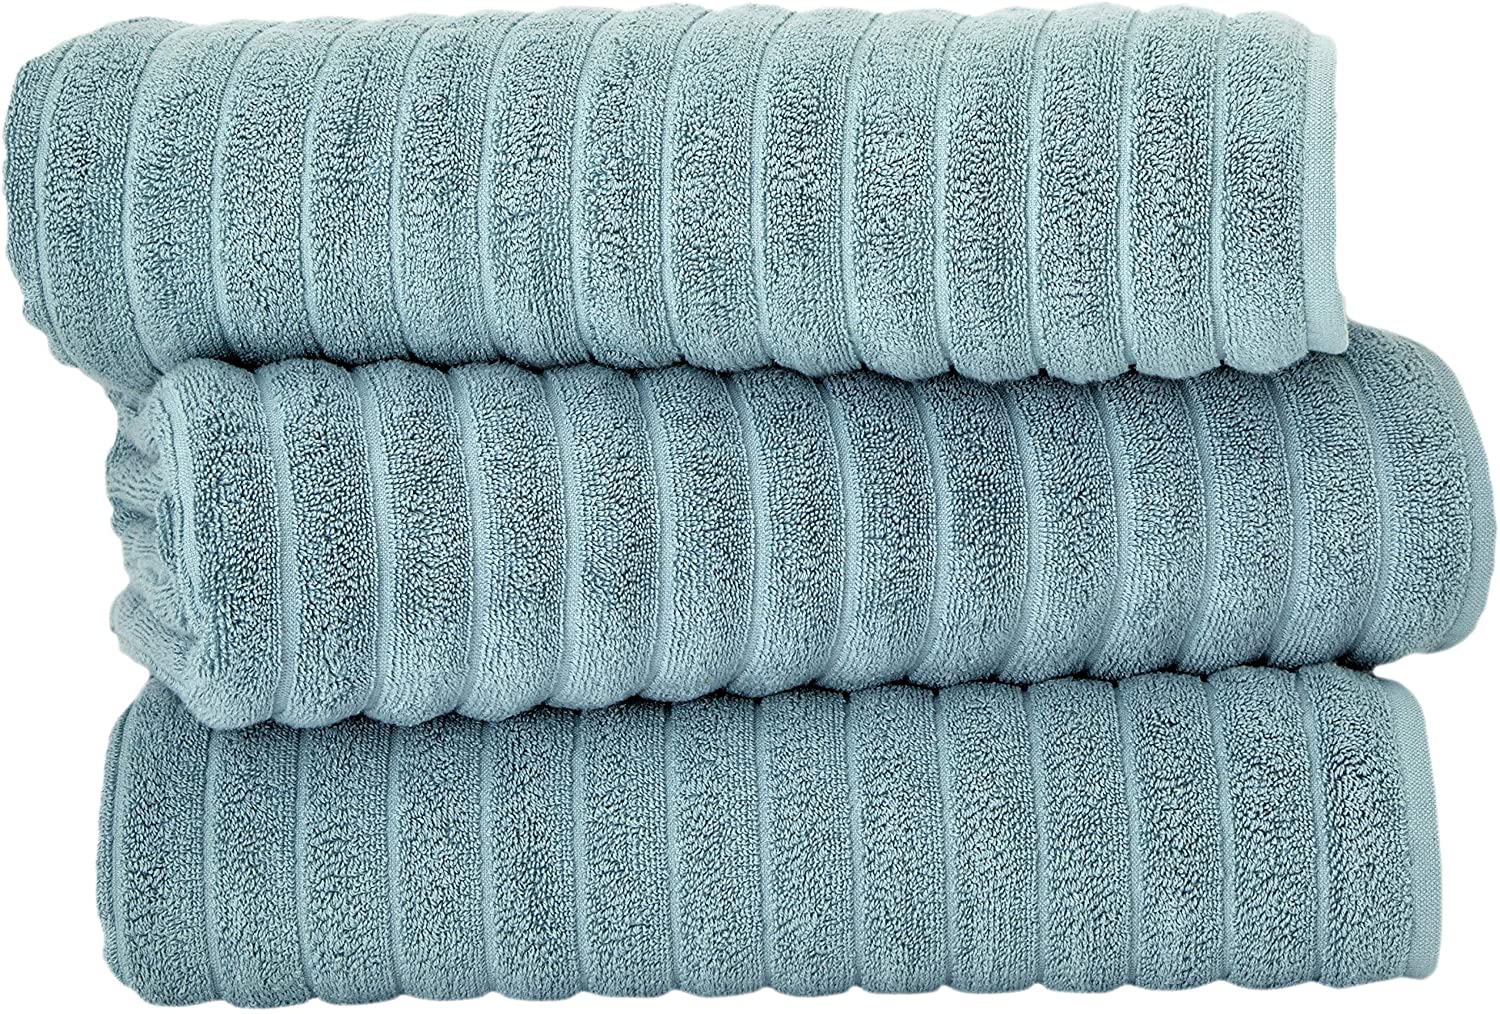 Classic Turkish Towels Ribbed Flat Woven Towel, 3-Pack